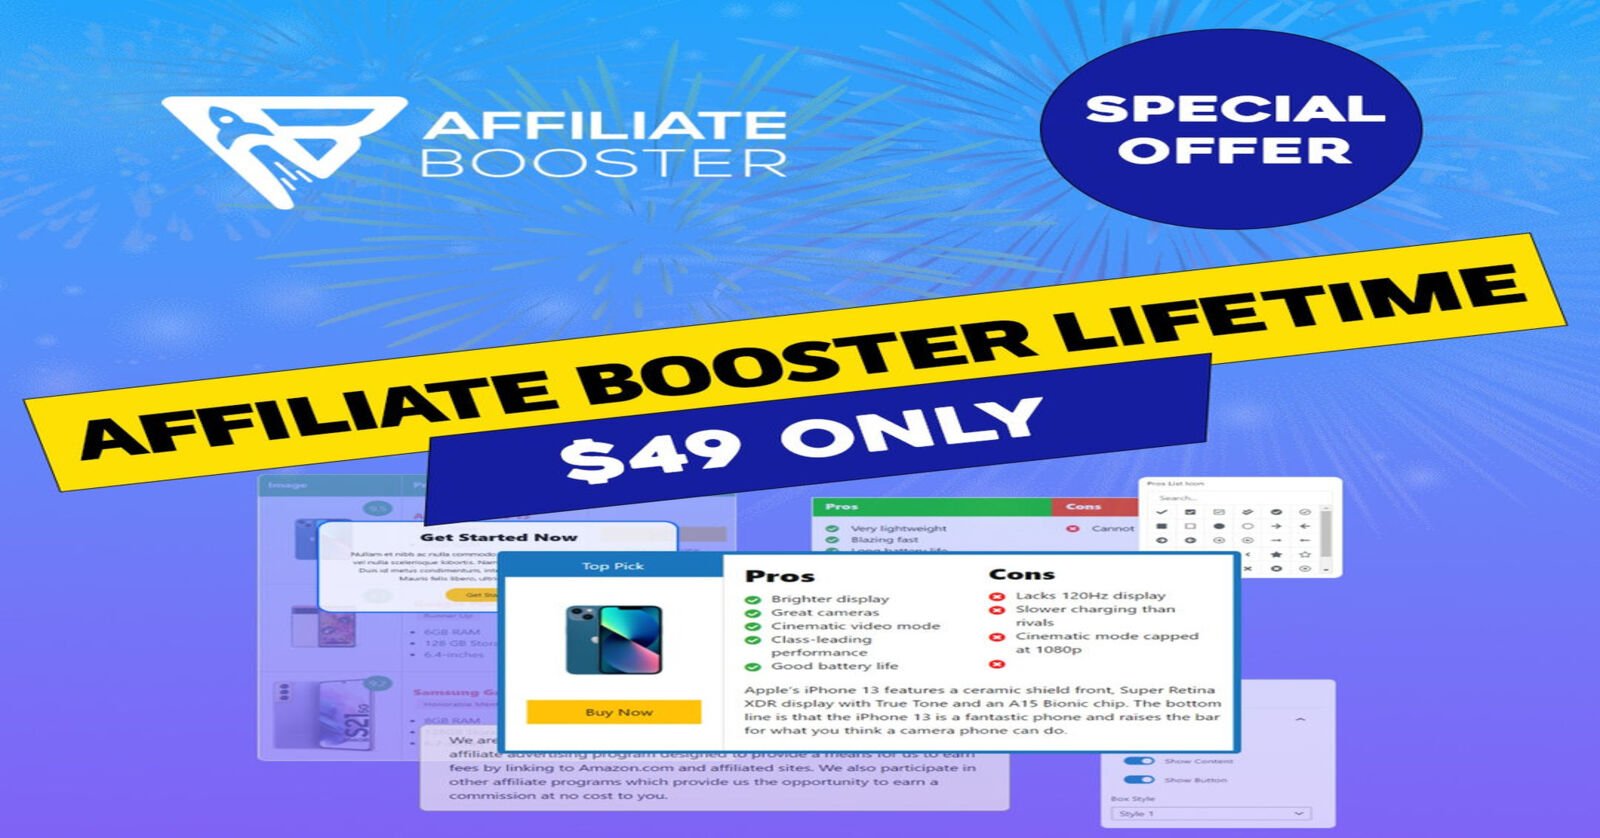 Affiliate Booster pro black Friday deal